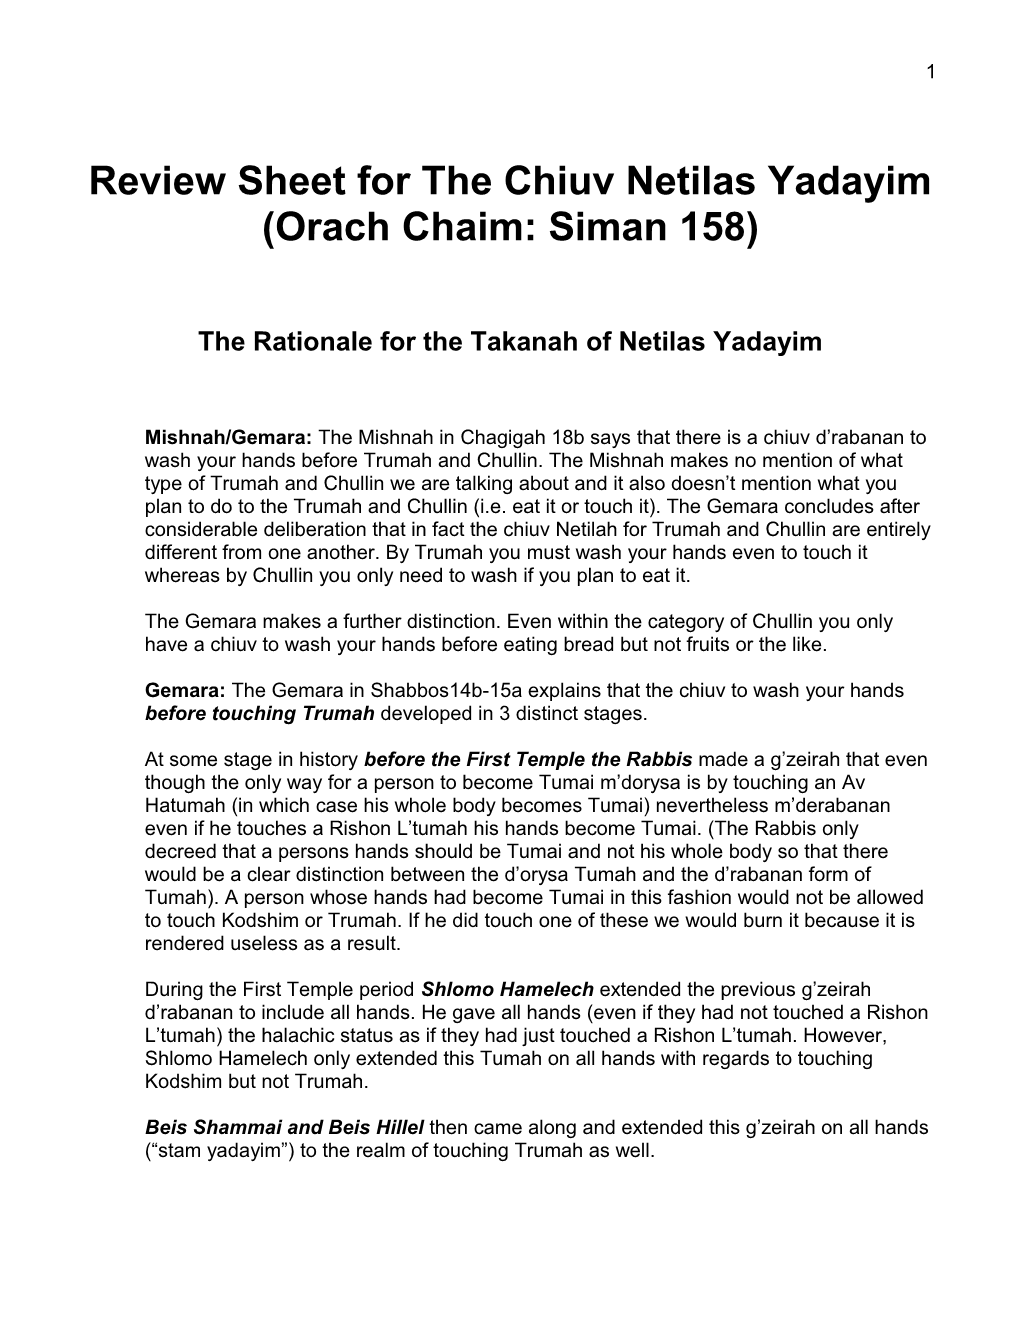 Review Sheet for the Chiuv Netilas Yadayim